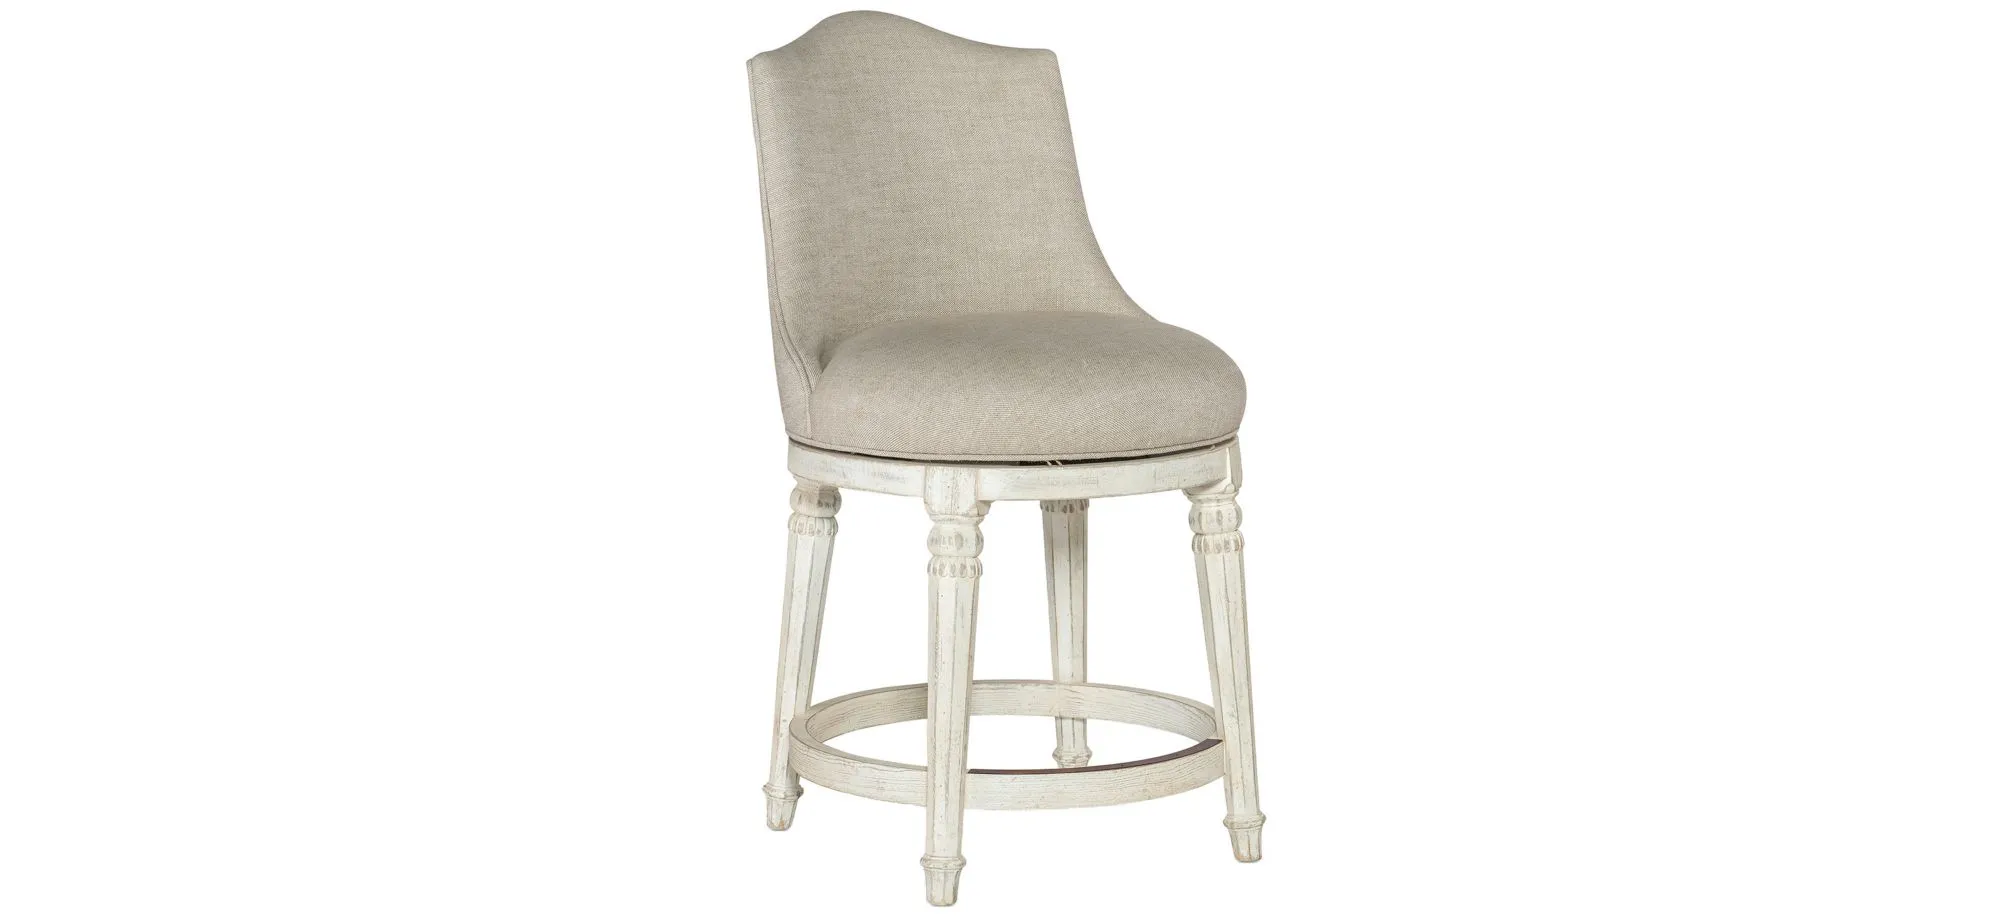 Traditions Counter Stool in Soft White by Hooker Furniture